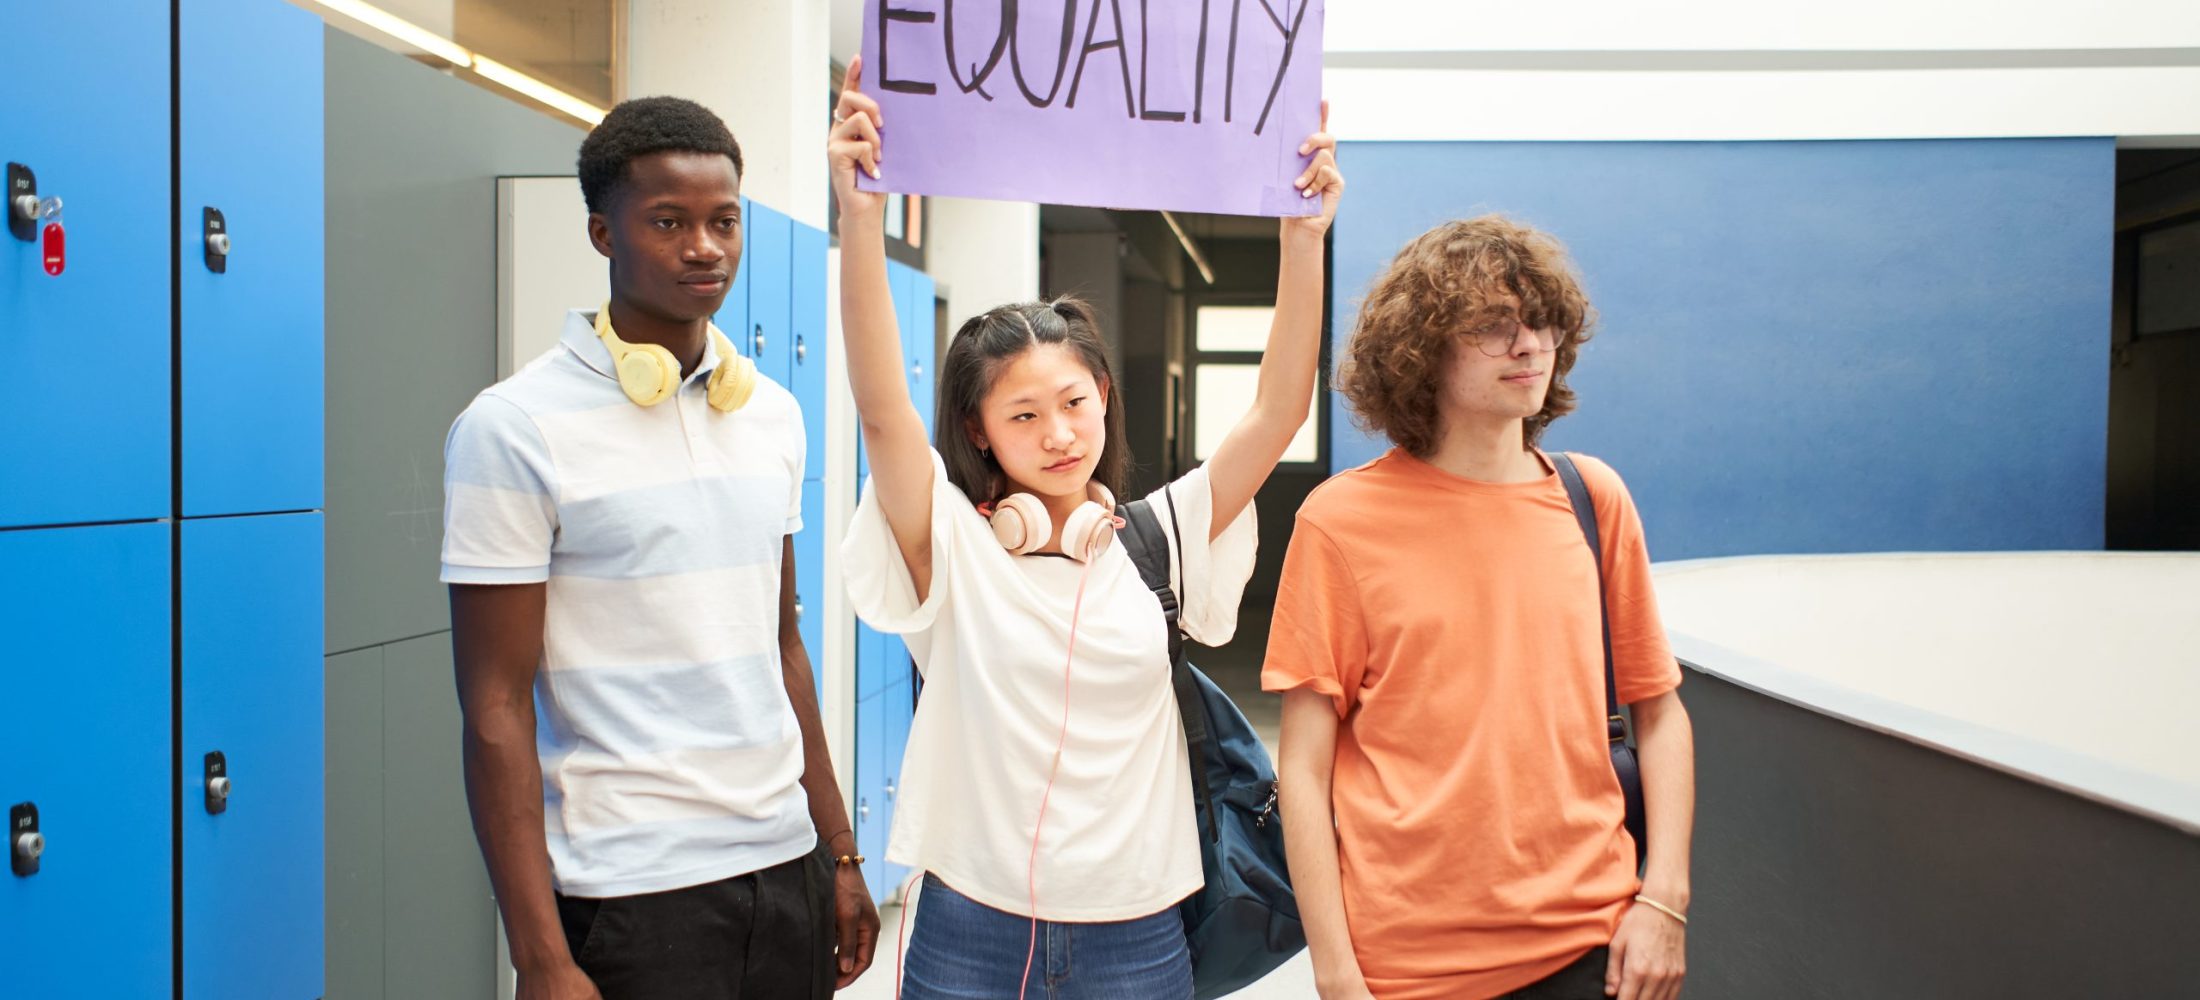 Group of students carrying a banner at school protesting for equality.